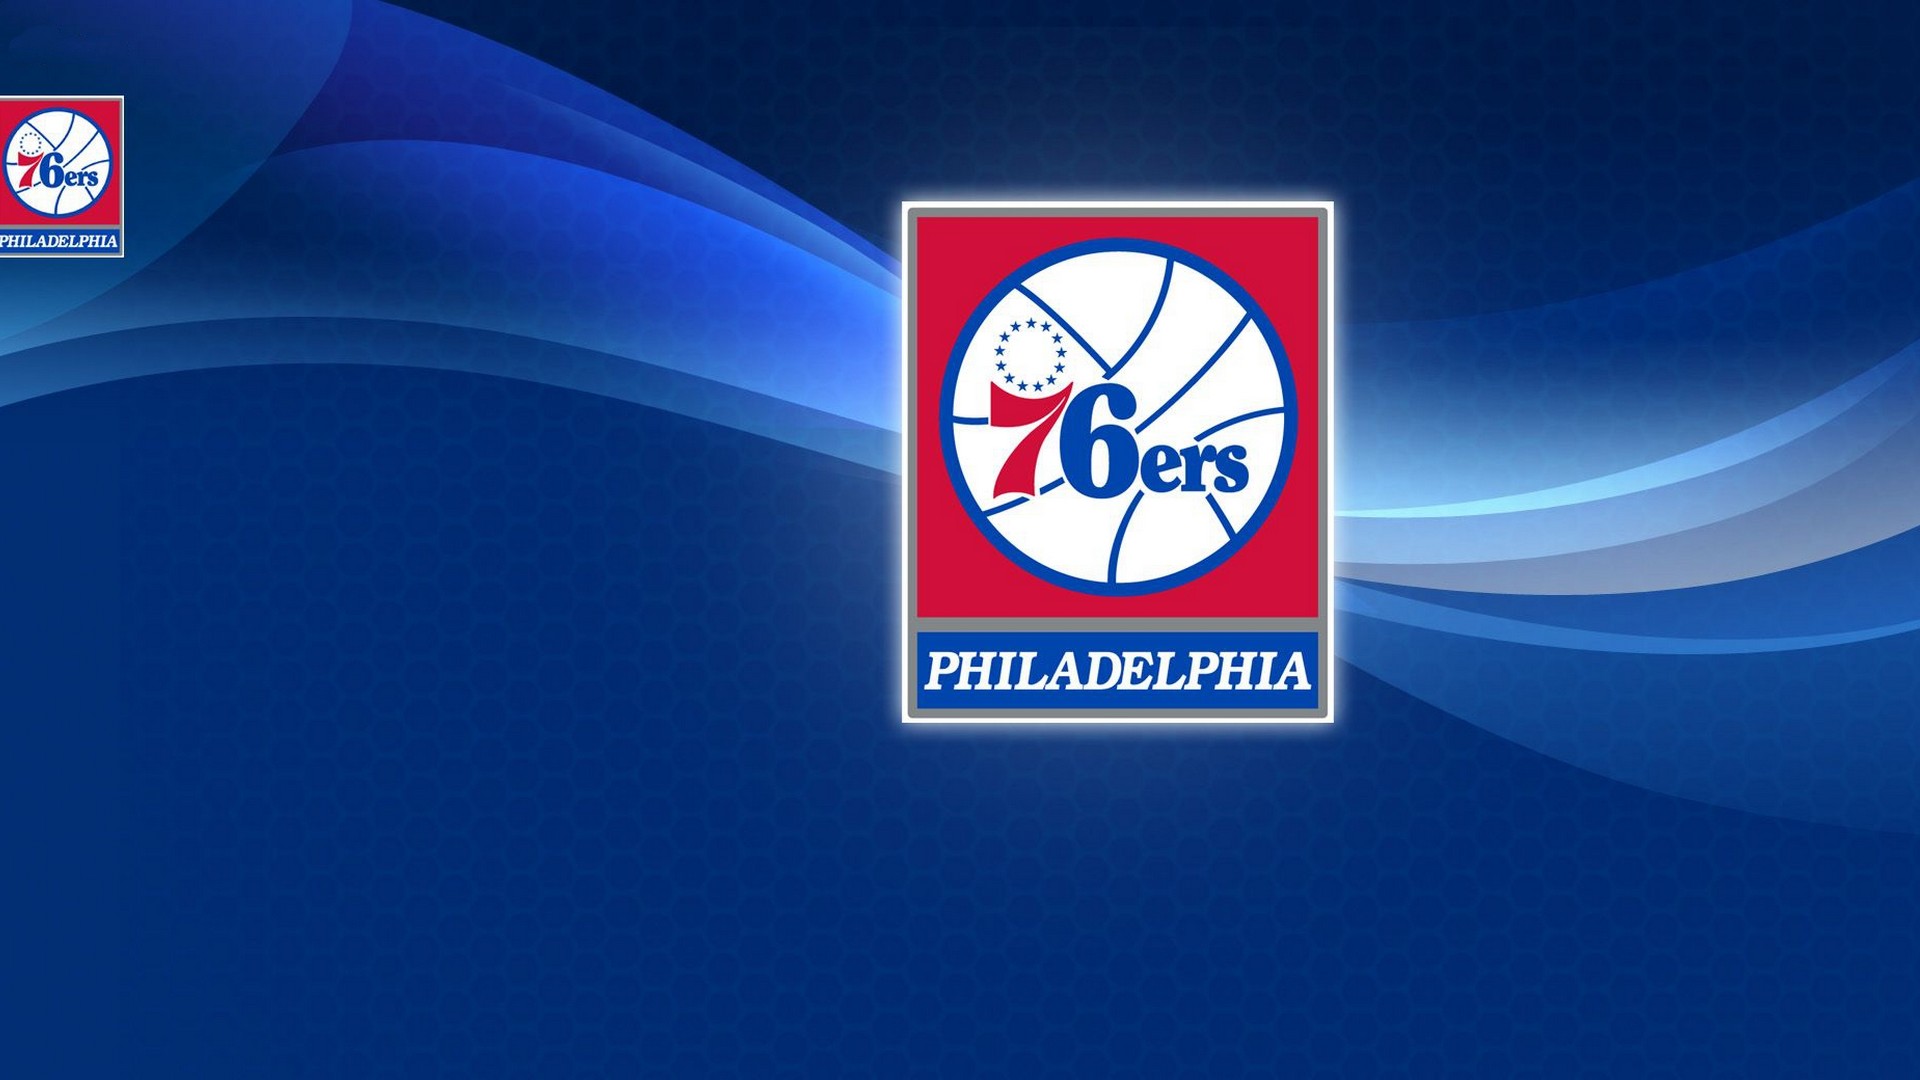 HD Philadelphia 76ers Wallpapers with high-resolution 1920x1080 pixel. You can use this wallpaper for your Desktop Computer Backgrounds, Windows or Mac Screensavers, iPhone Lock screen, Tablet or Android and another Mobile Phone device